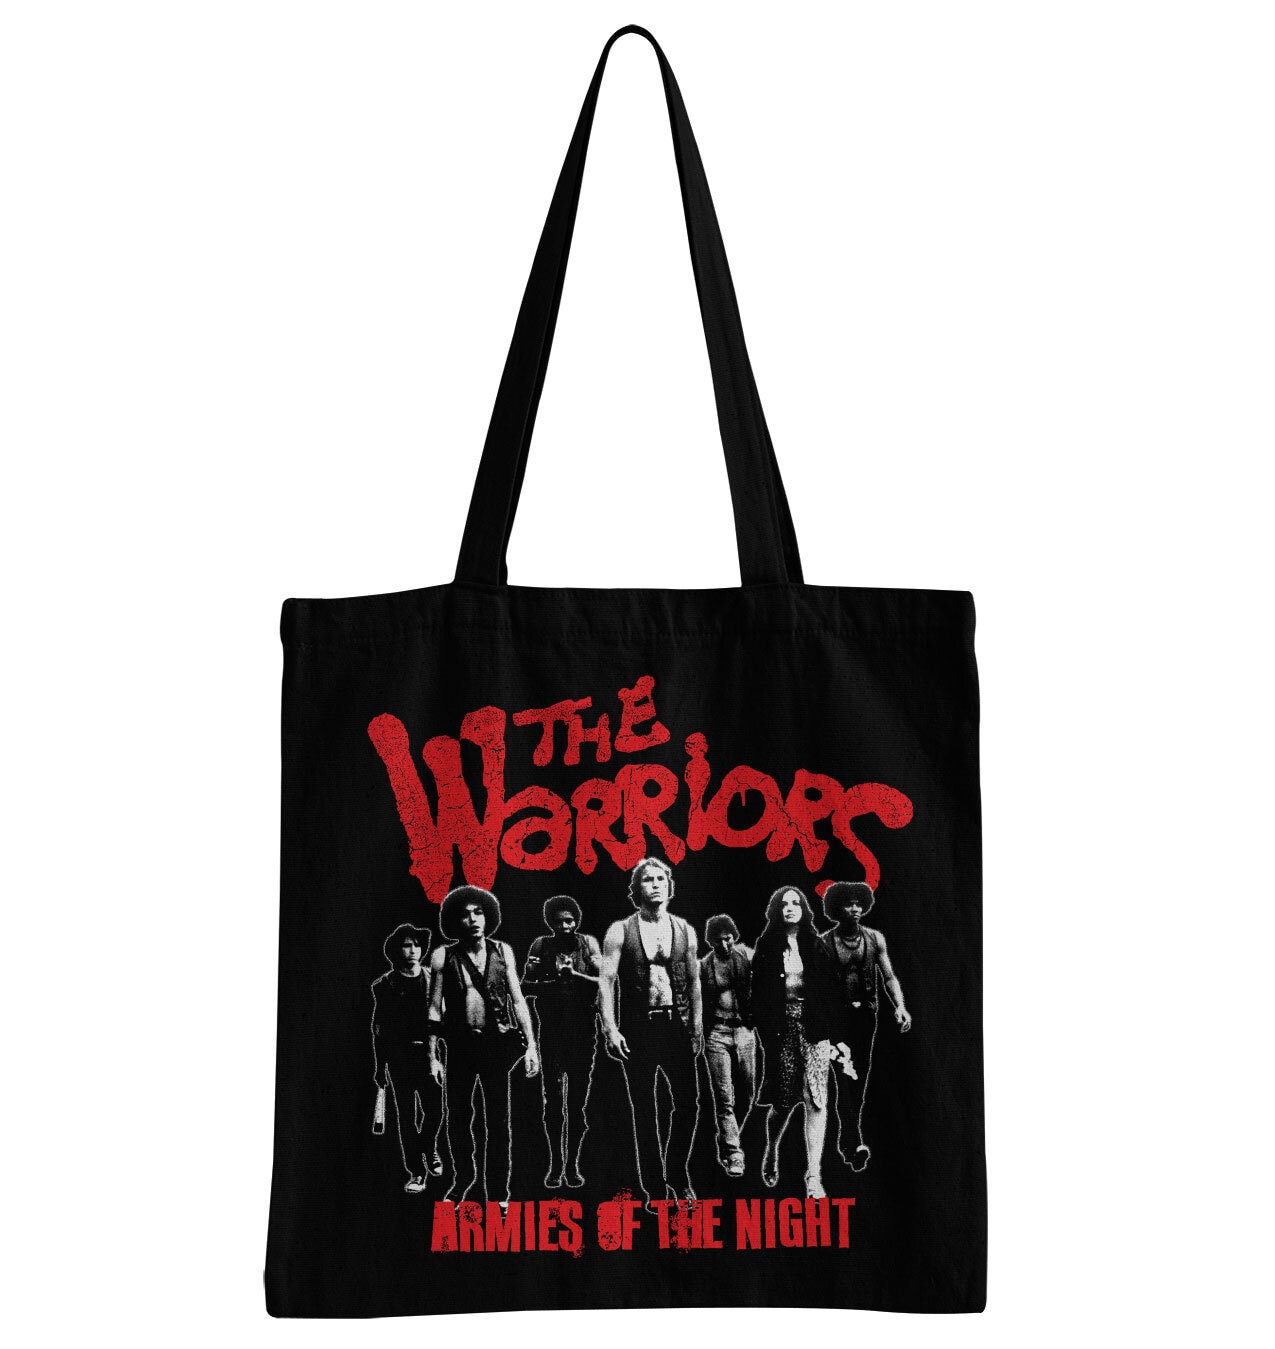 The Warriors - Armies Of The Night Tote Bag